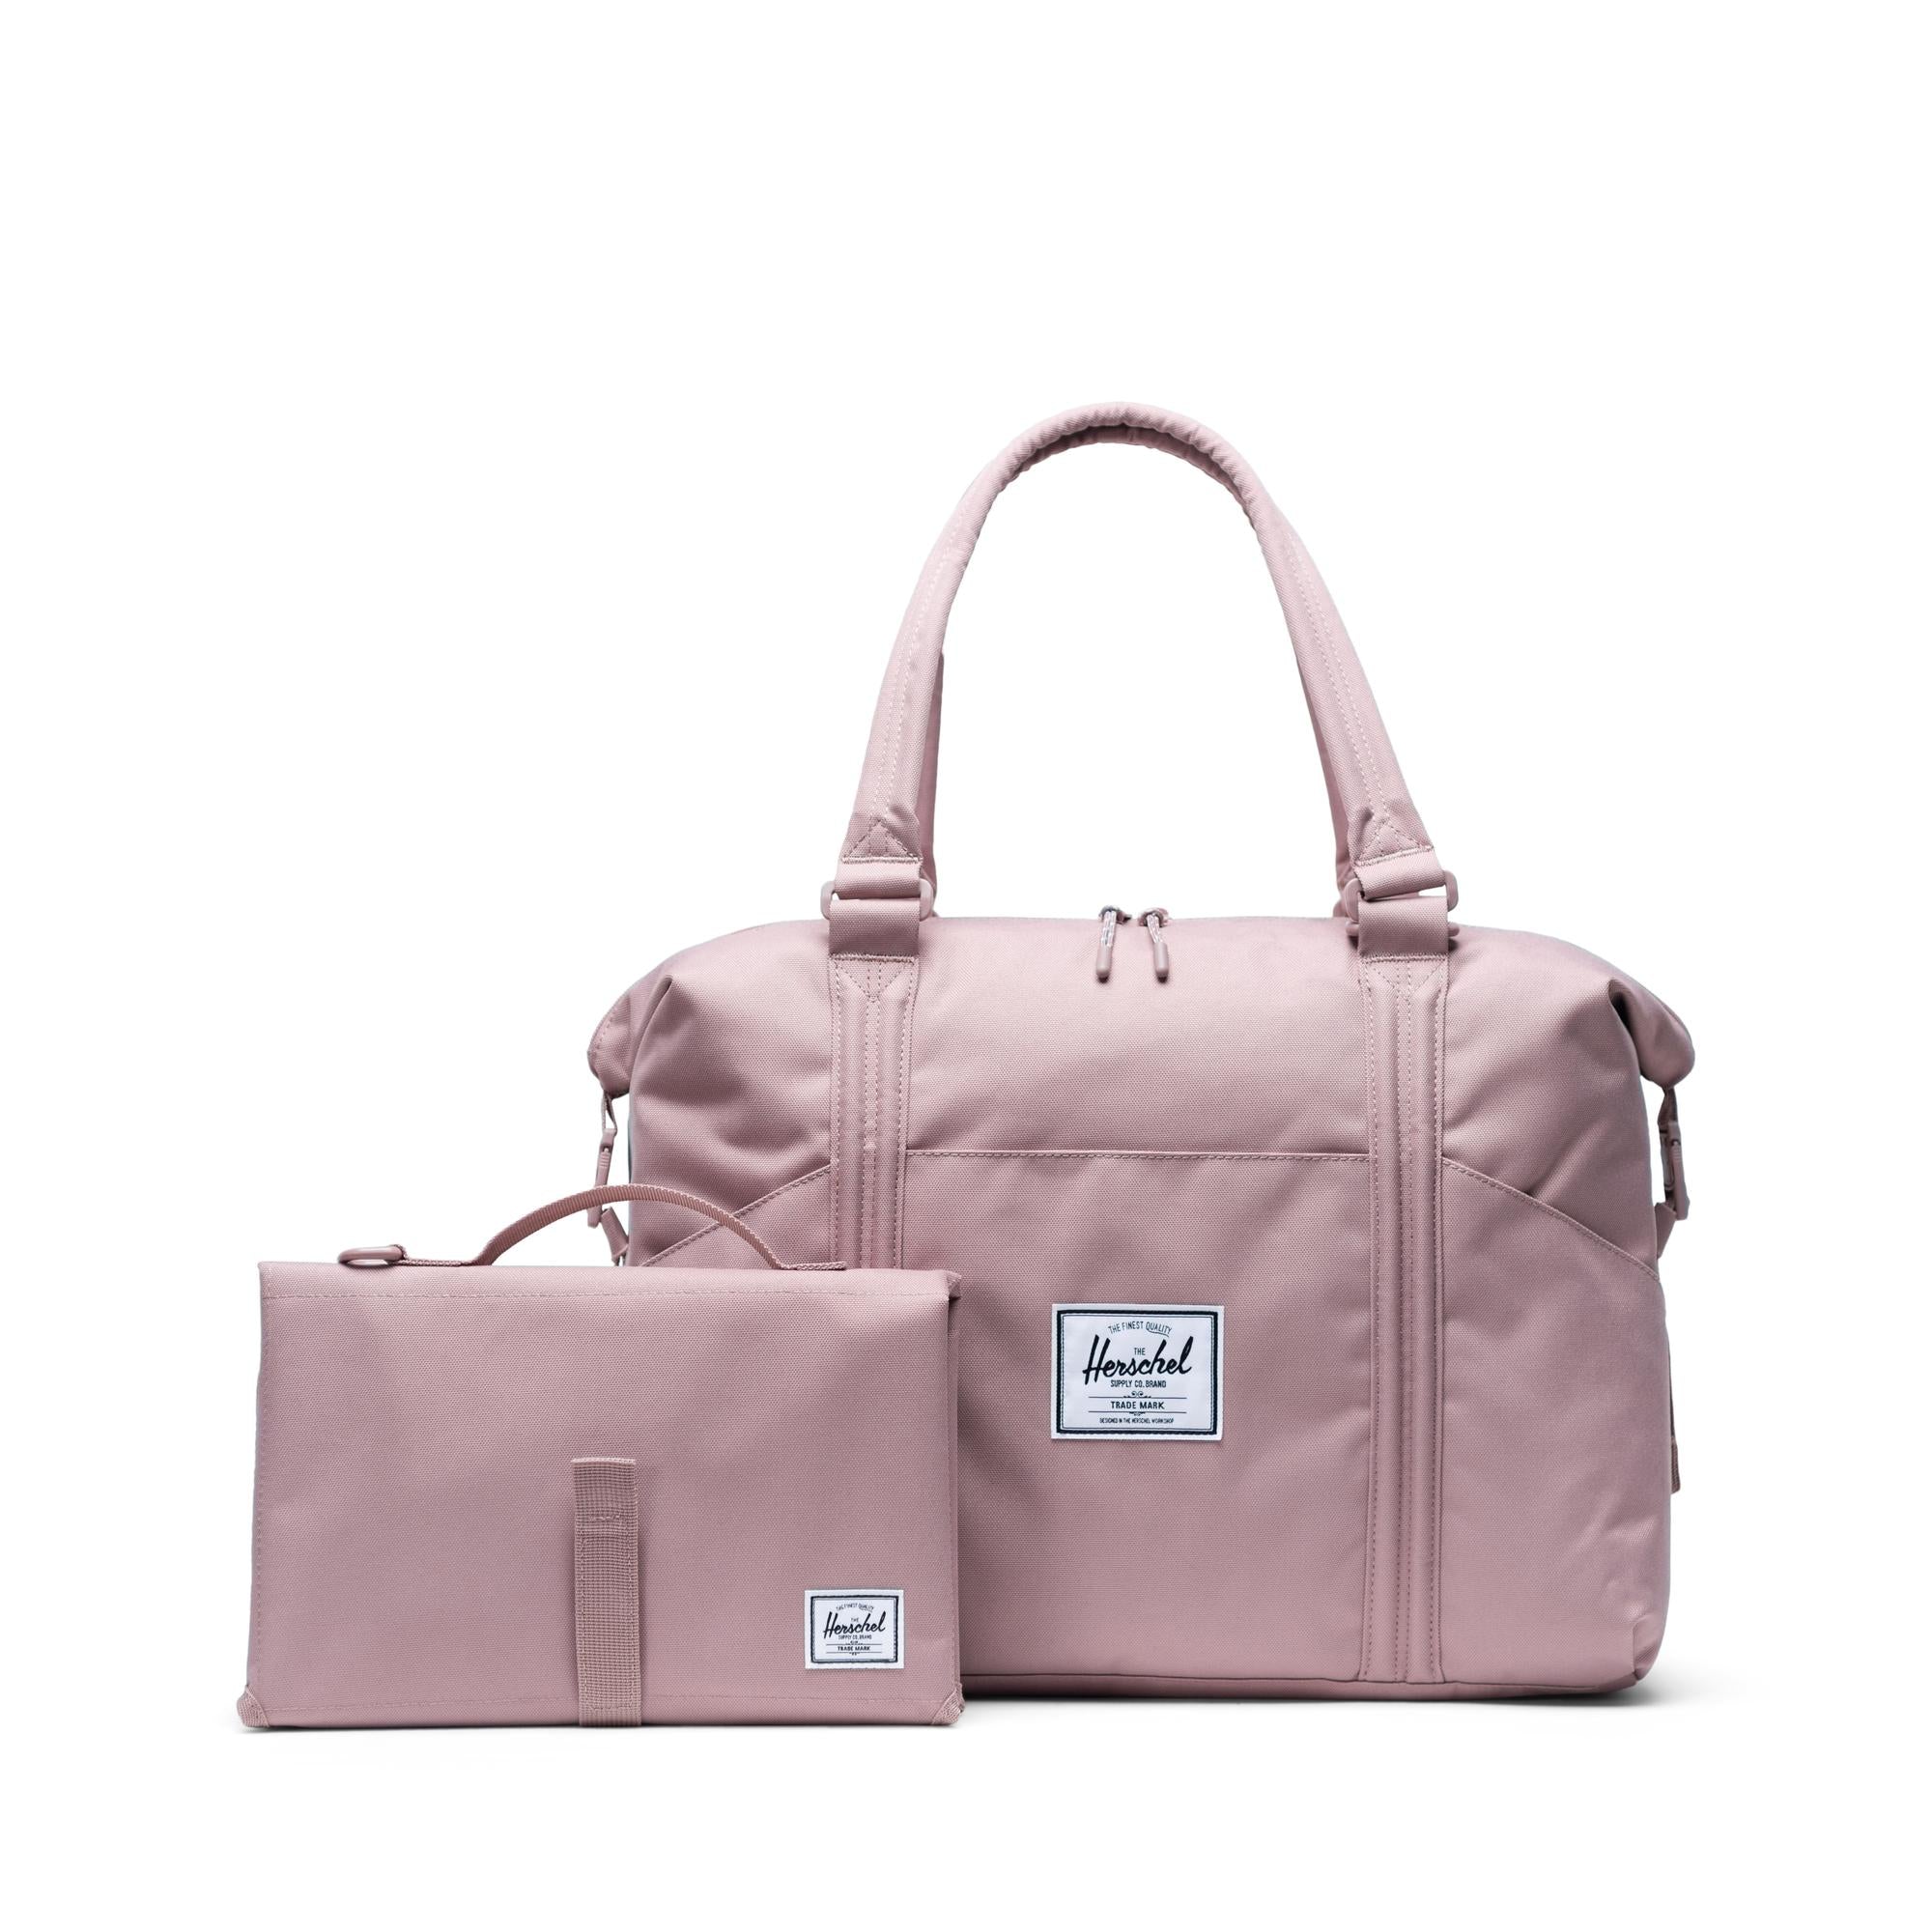 Herschel Supply Co. | Strand Sprout Tote Nappy Bag - Ash Rose